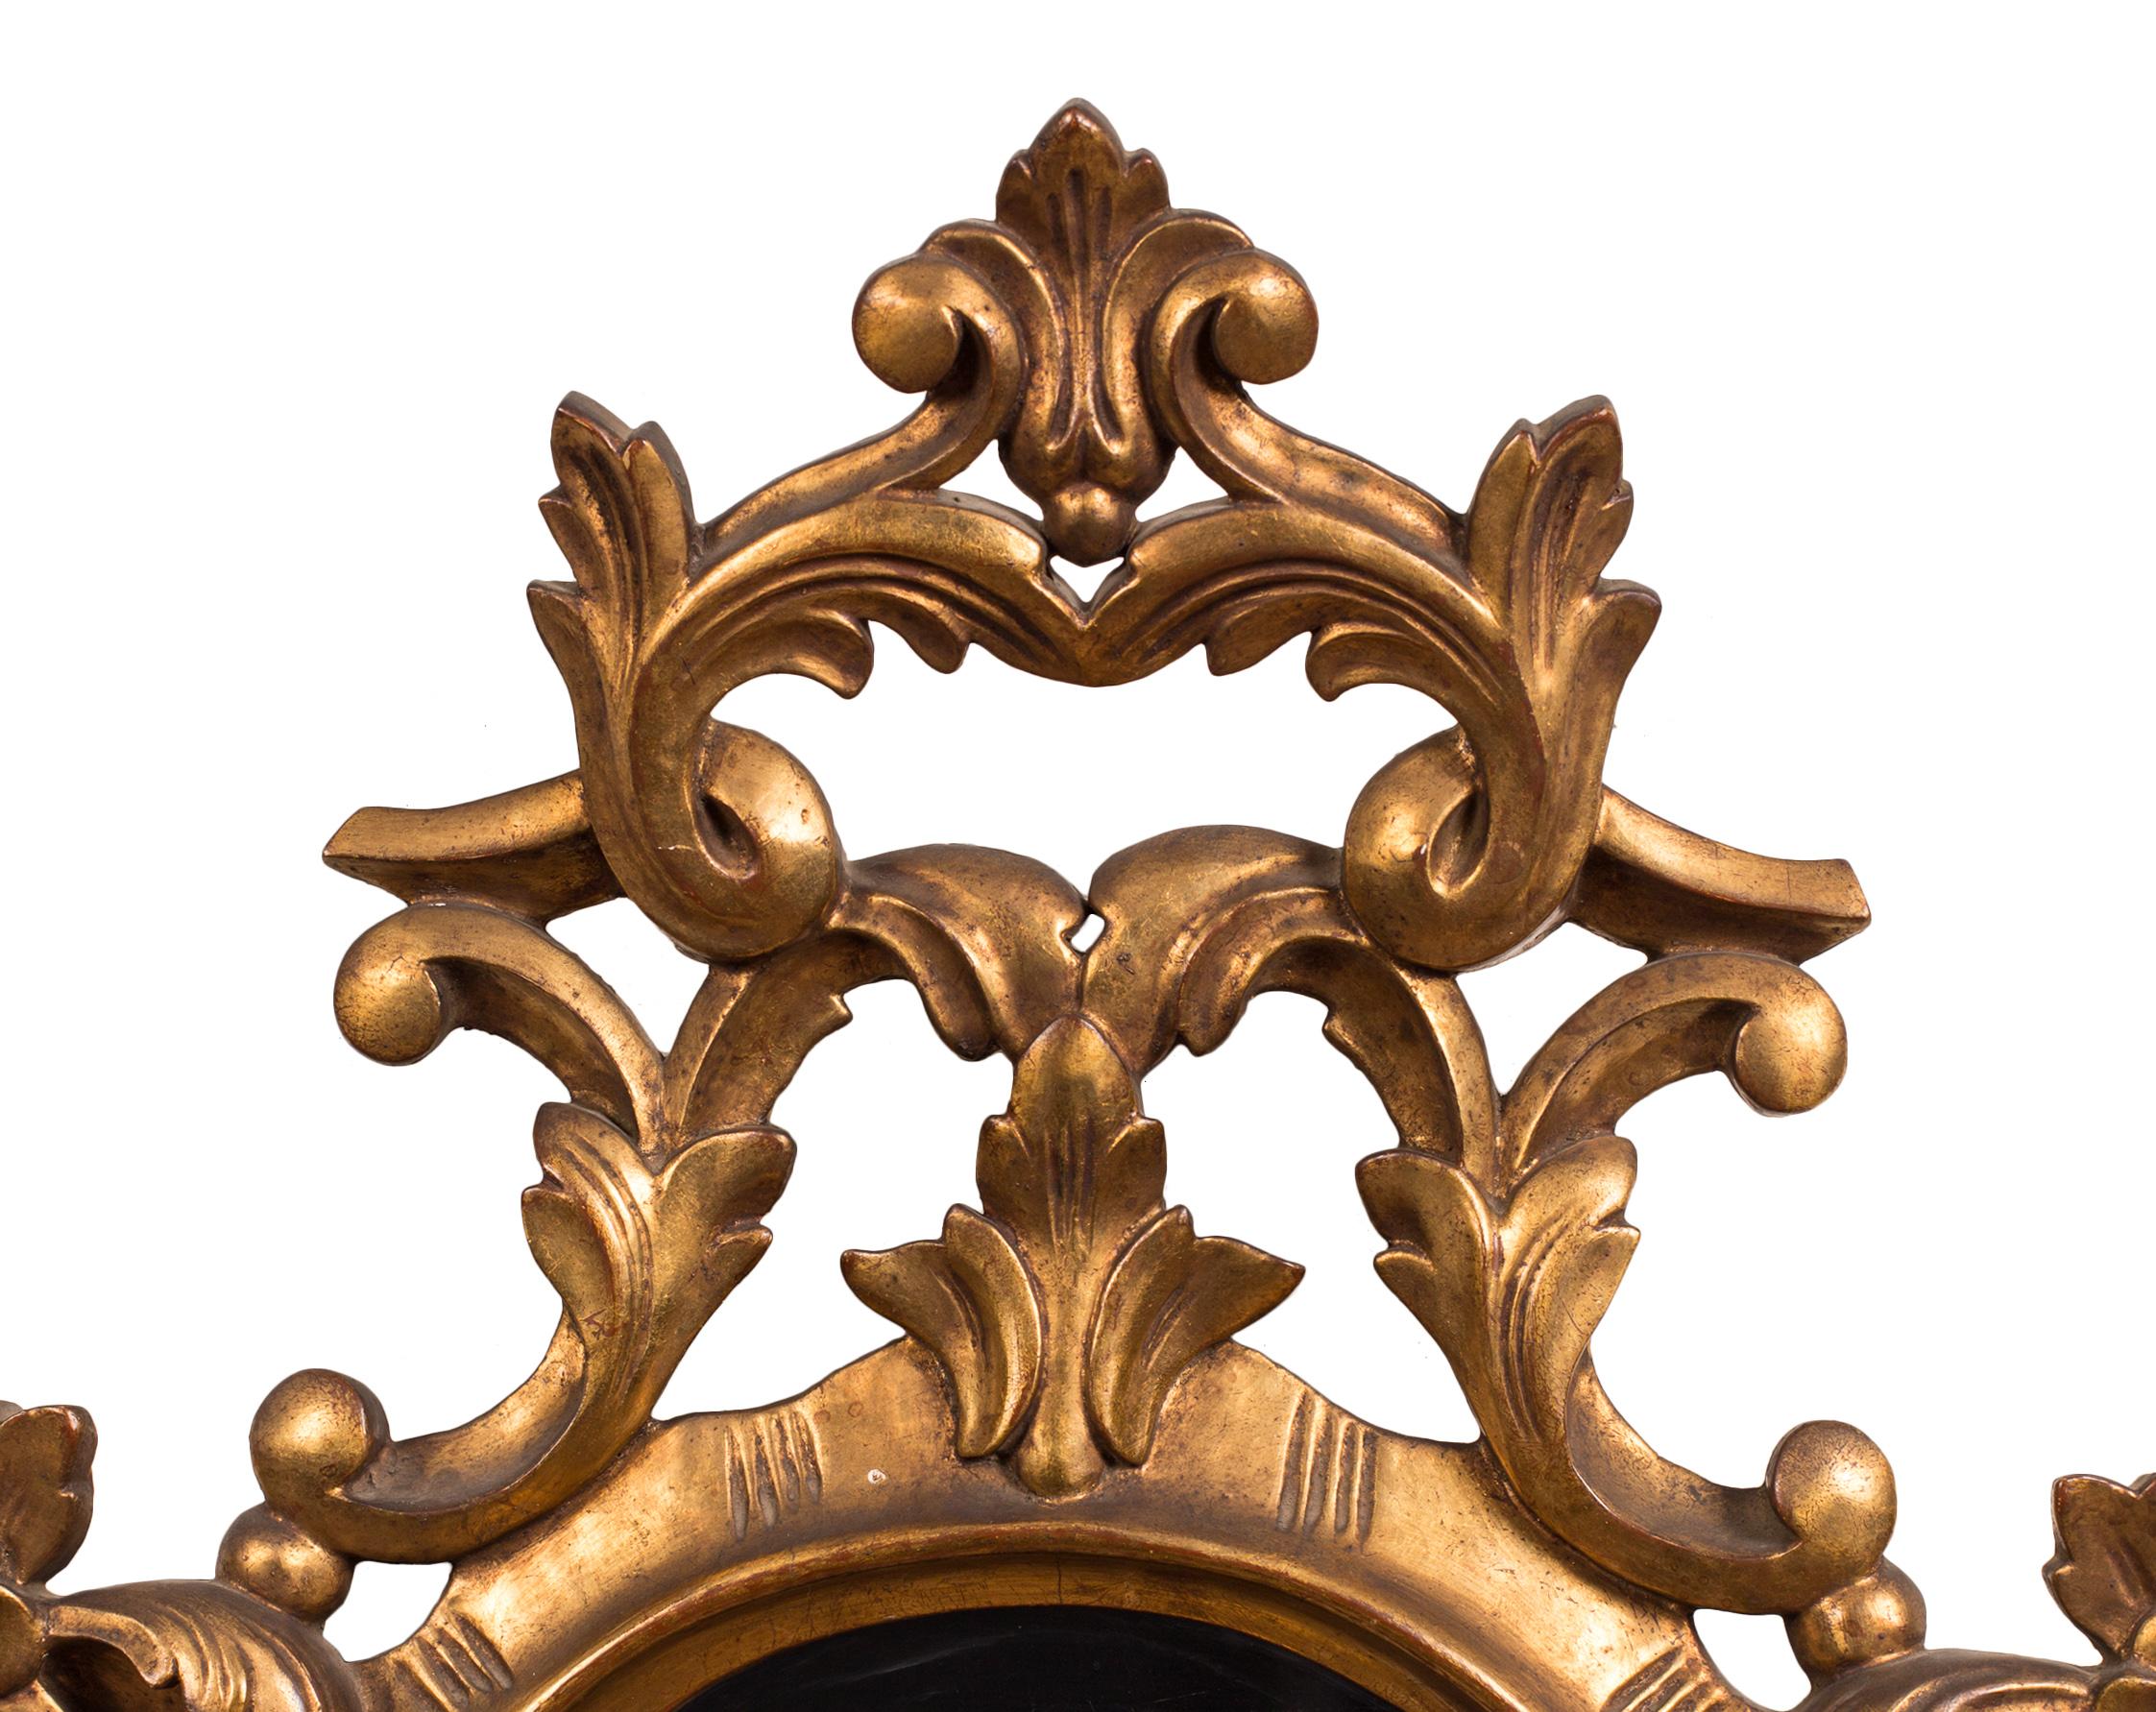 Baroque Revival 19th Century Spanish Giltwood Mirror Sconce, La Granja Glass, Electrified For Sale